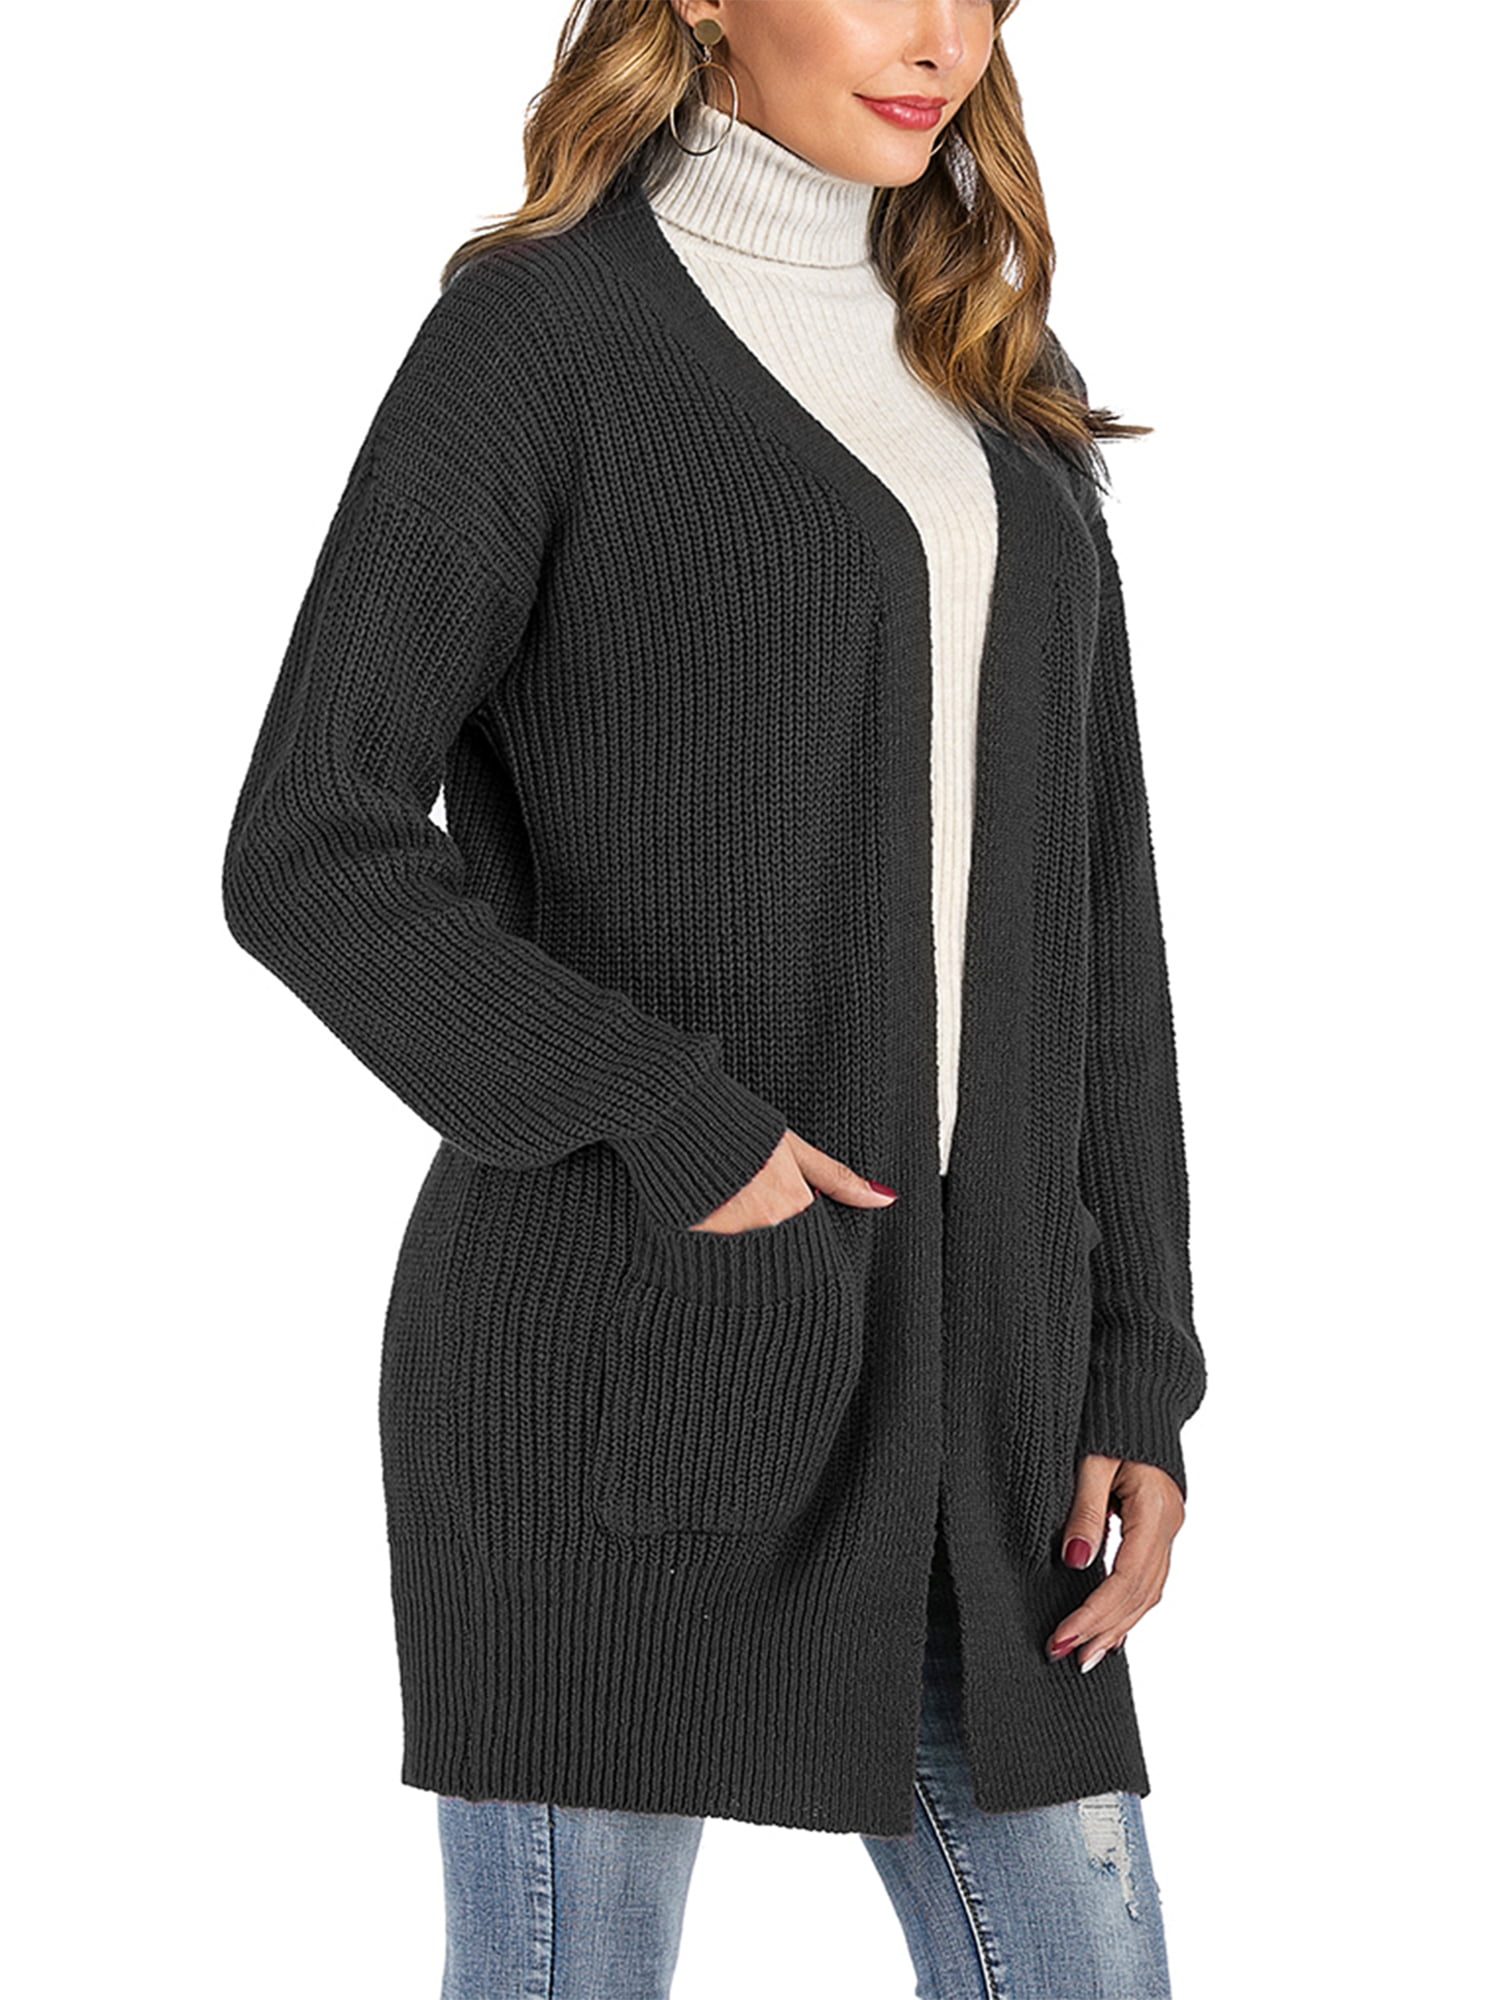 Women's Chunky Cable Knit Cardigan Long Hooded Open Front Coat Loose Comfy Knit Sweater Winter Warm Plus Size Outwear 